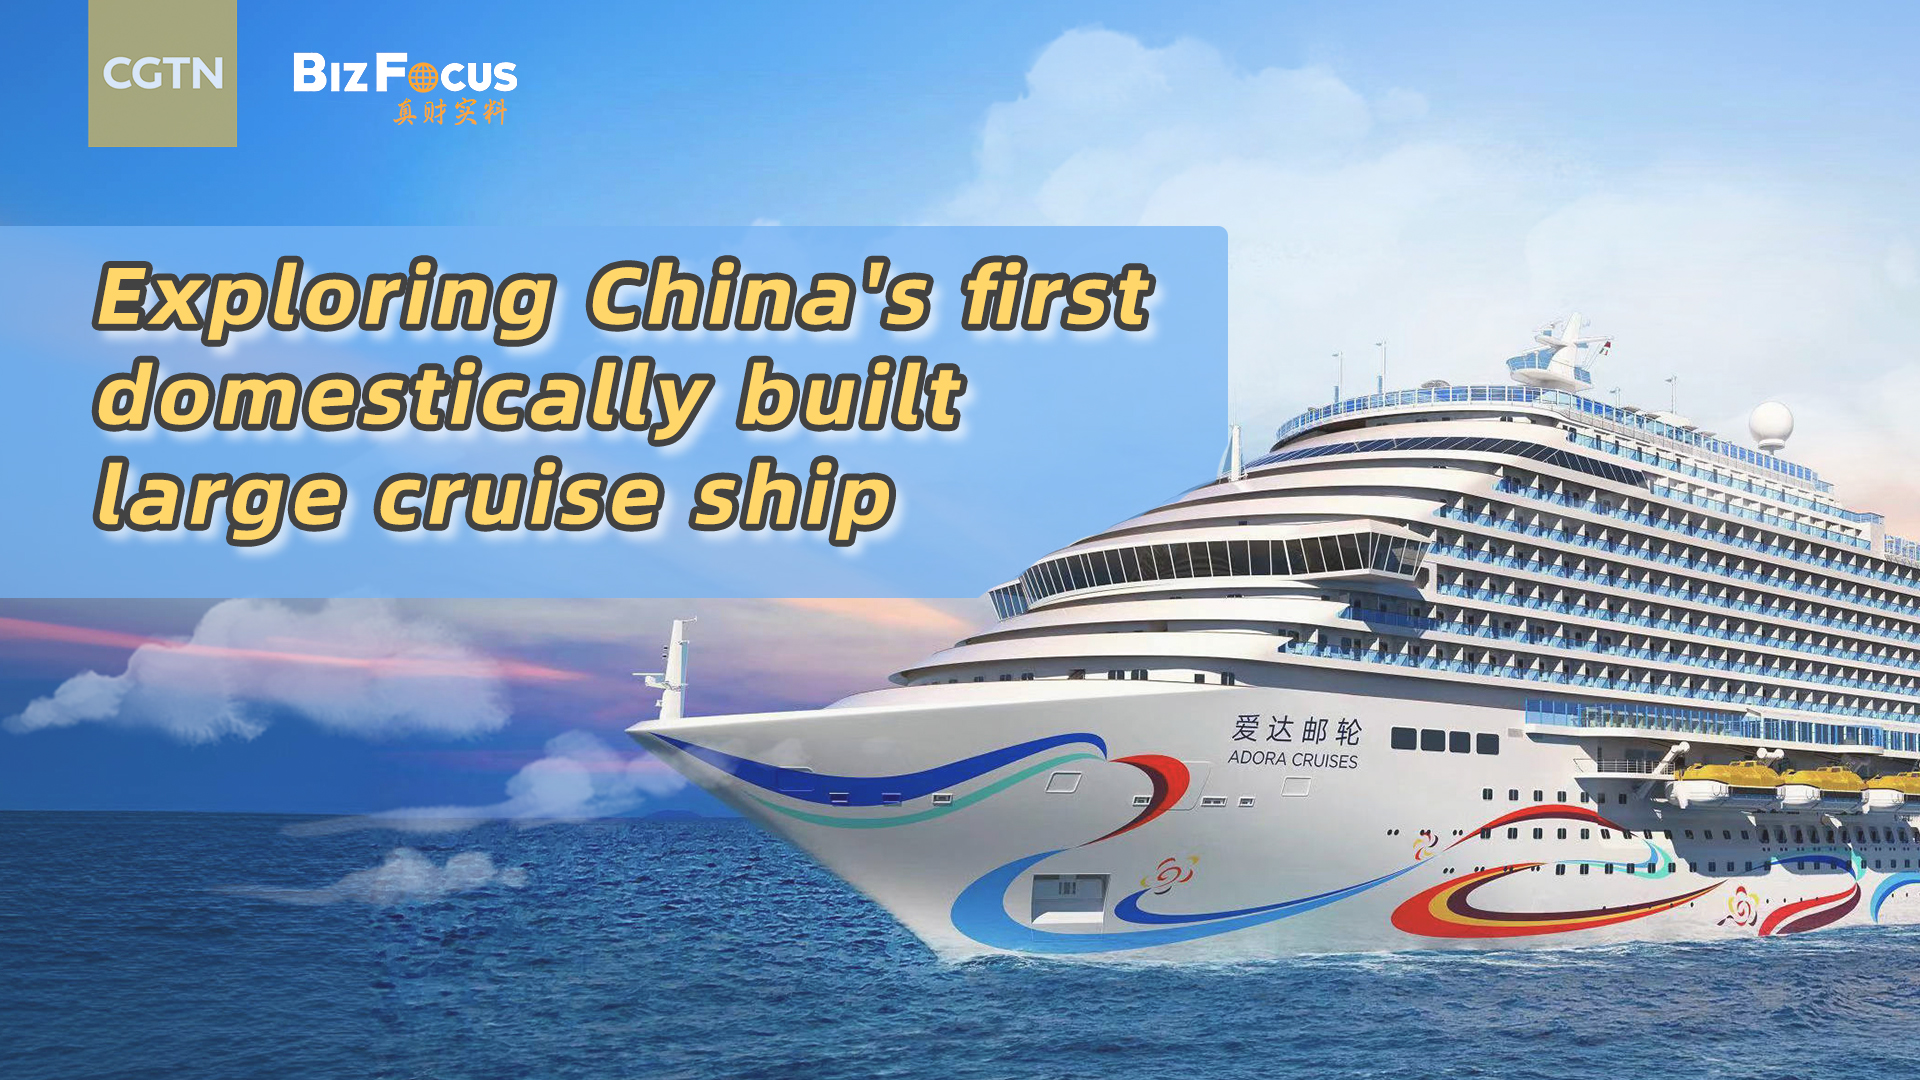 Watch: Exploring China's first domestically built large cruise ship